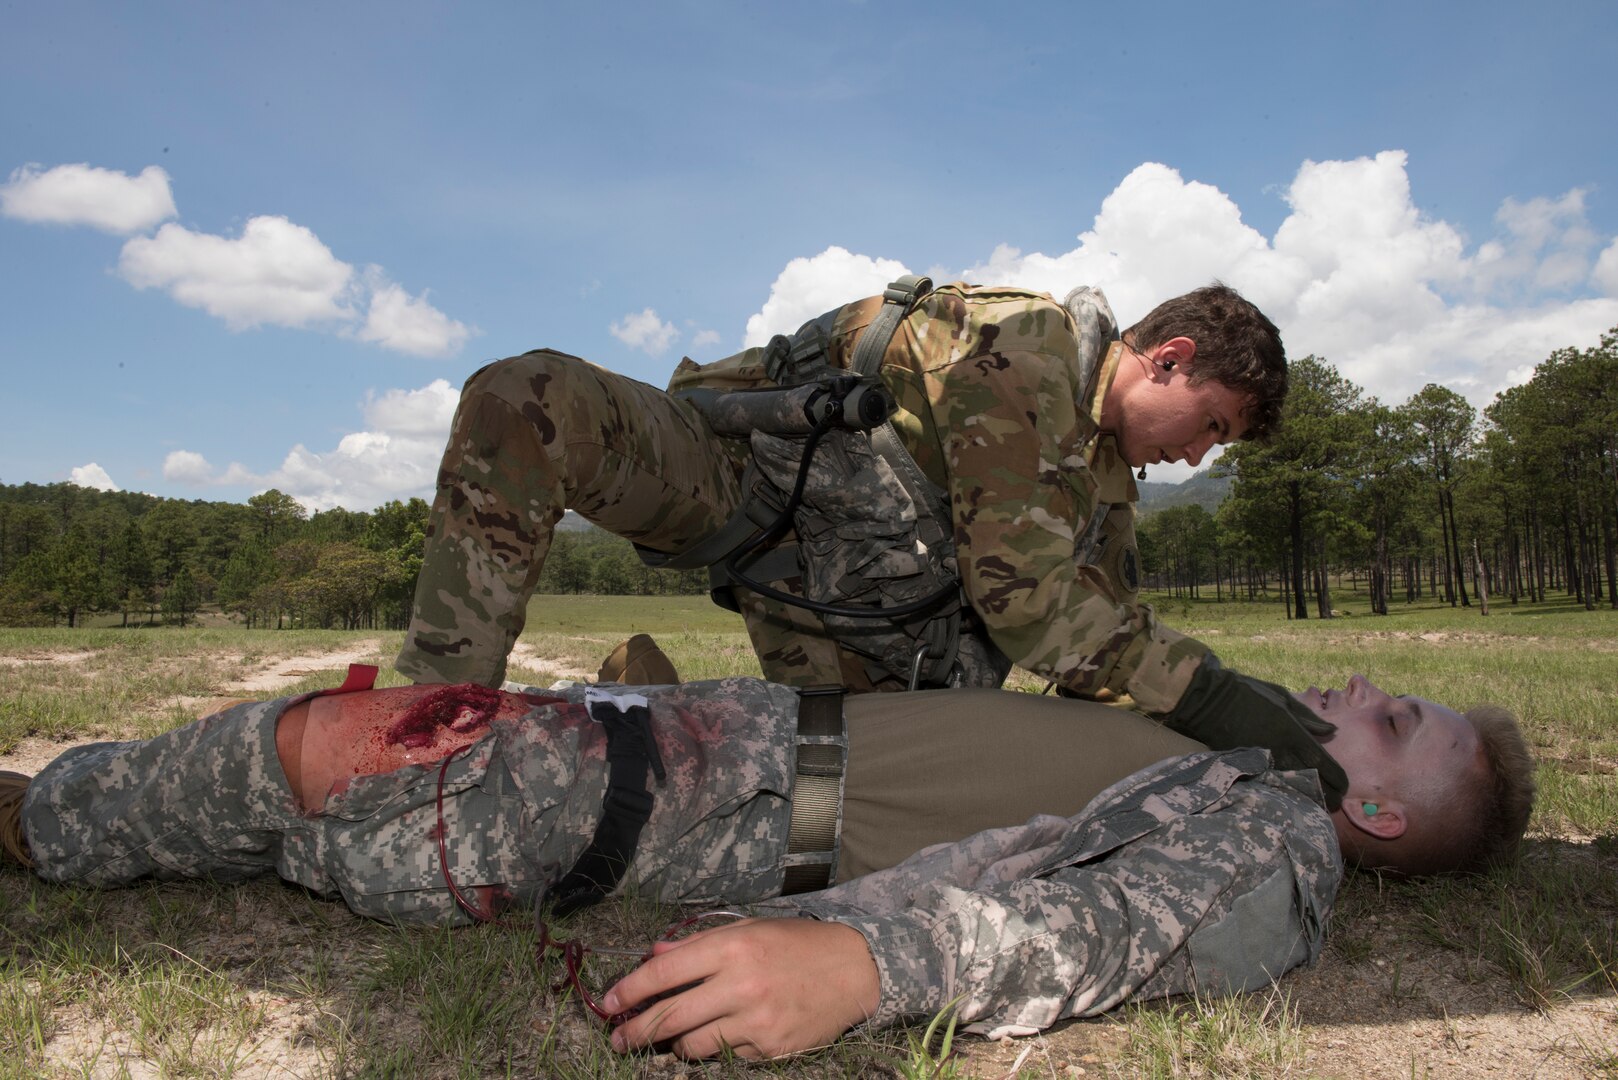 U.S. Army Sgt. Alicia Baum, 1st Battalion 228th Aviation Regiment flight paramedic, analyzes the condition of a simulated aircraft casualty during a search and rescue exercise, May 21, 2019, in Comayagua, Honduras. Members from various units on Joint Task Force – Bravo participated in the exercise that simulated a HH-60 Blackhawk crashed during a routine flight carrying personnel. The exercise practiced notification, recall, search and rescue, on-scene medical care, recovery of personnel from low and high angle austere terrain, and medical care once the injured returned to base. (U.S. Air Force photo by Staff Sgt. Eric Summers Jr.)